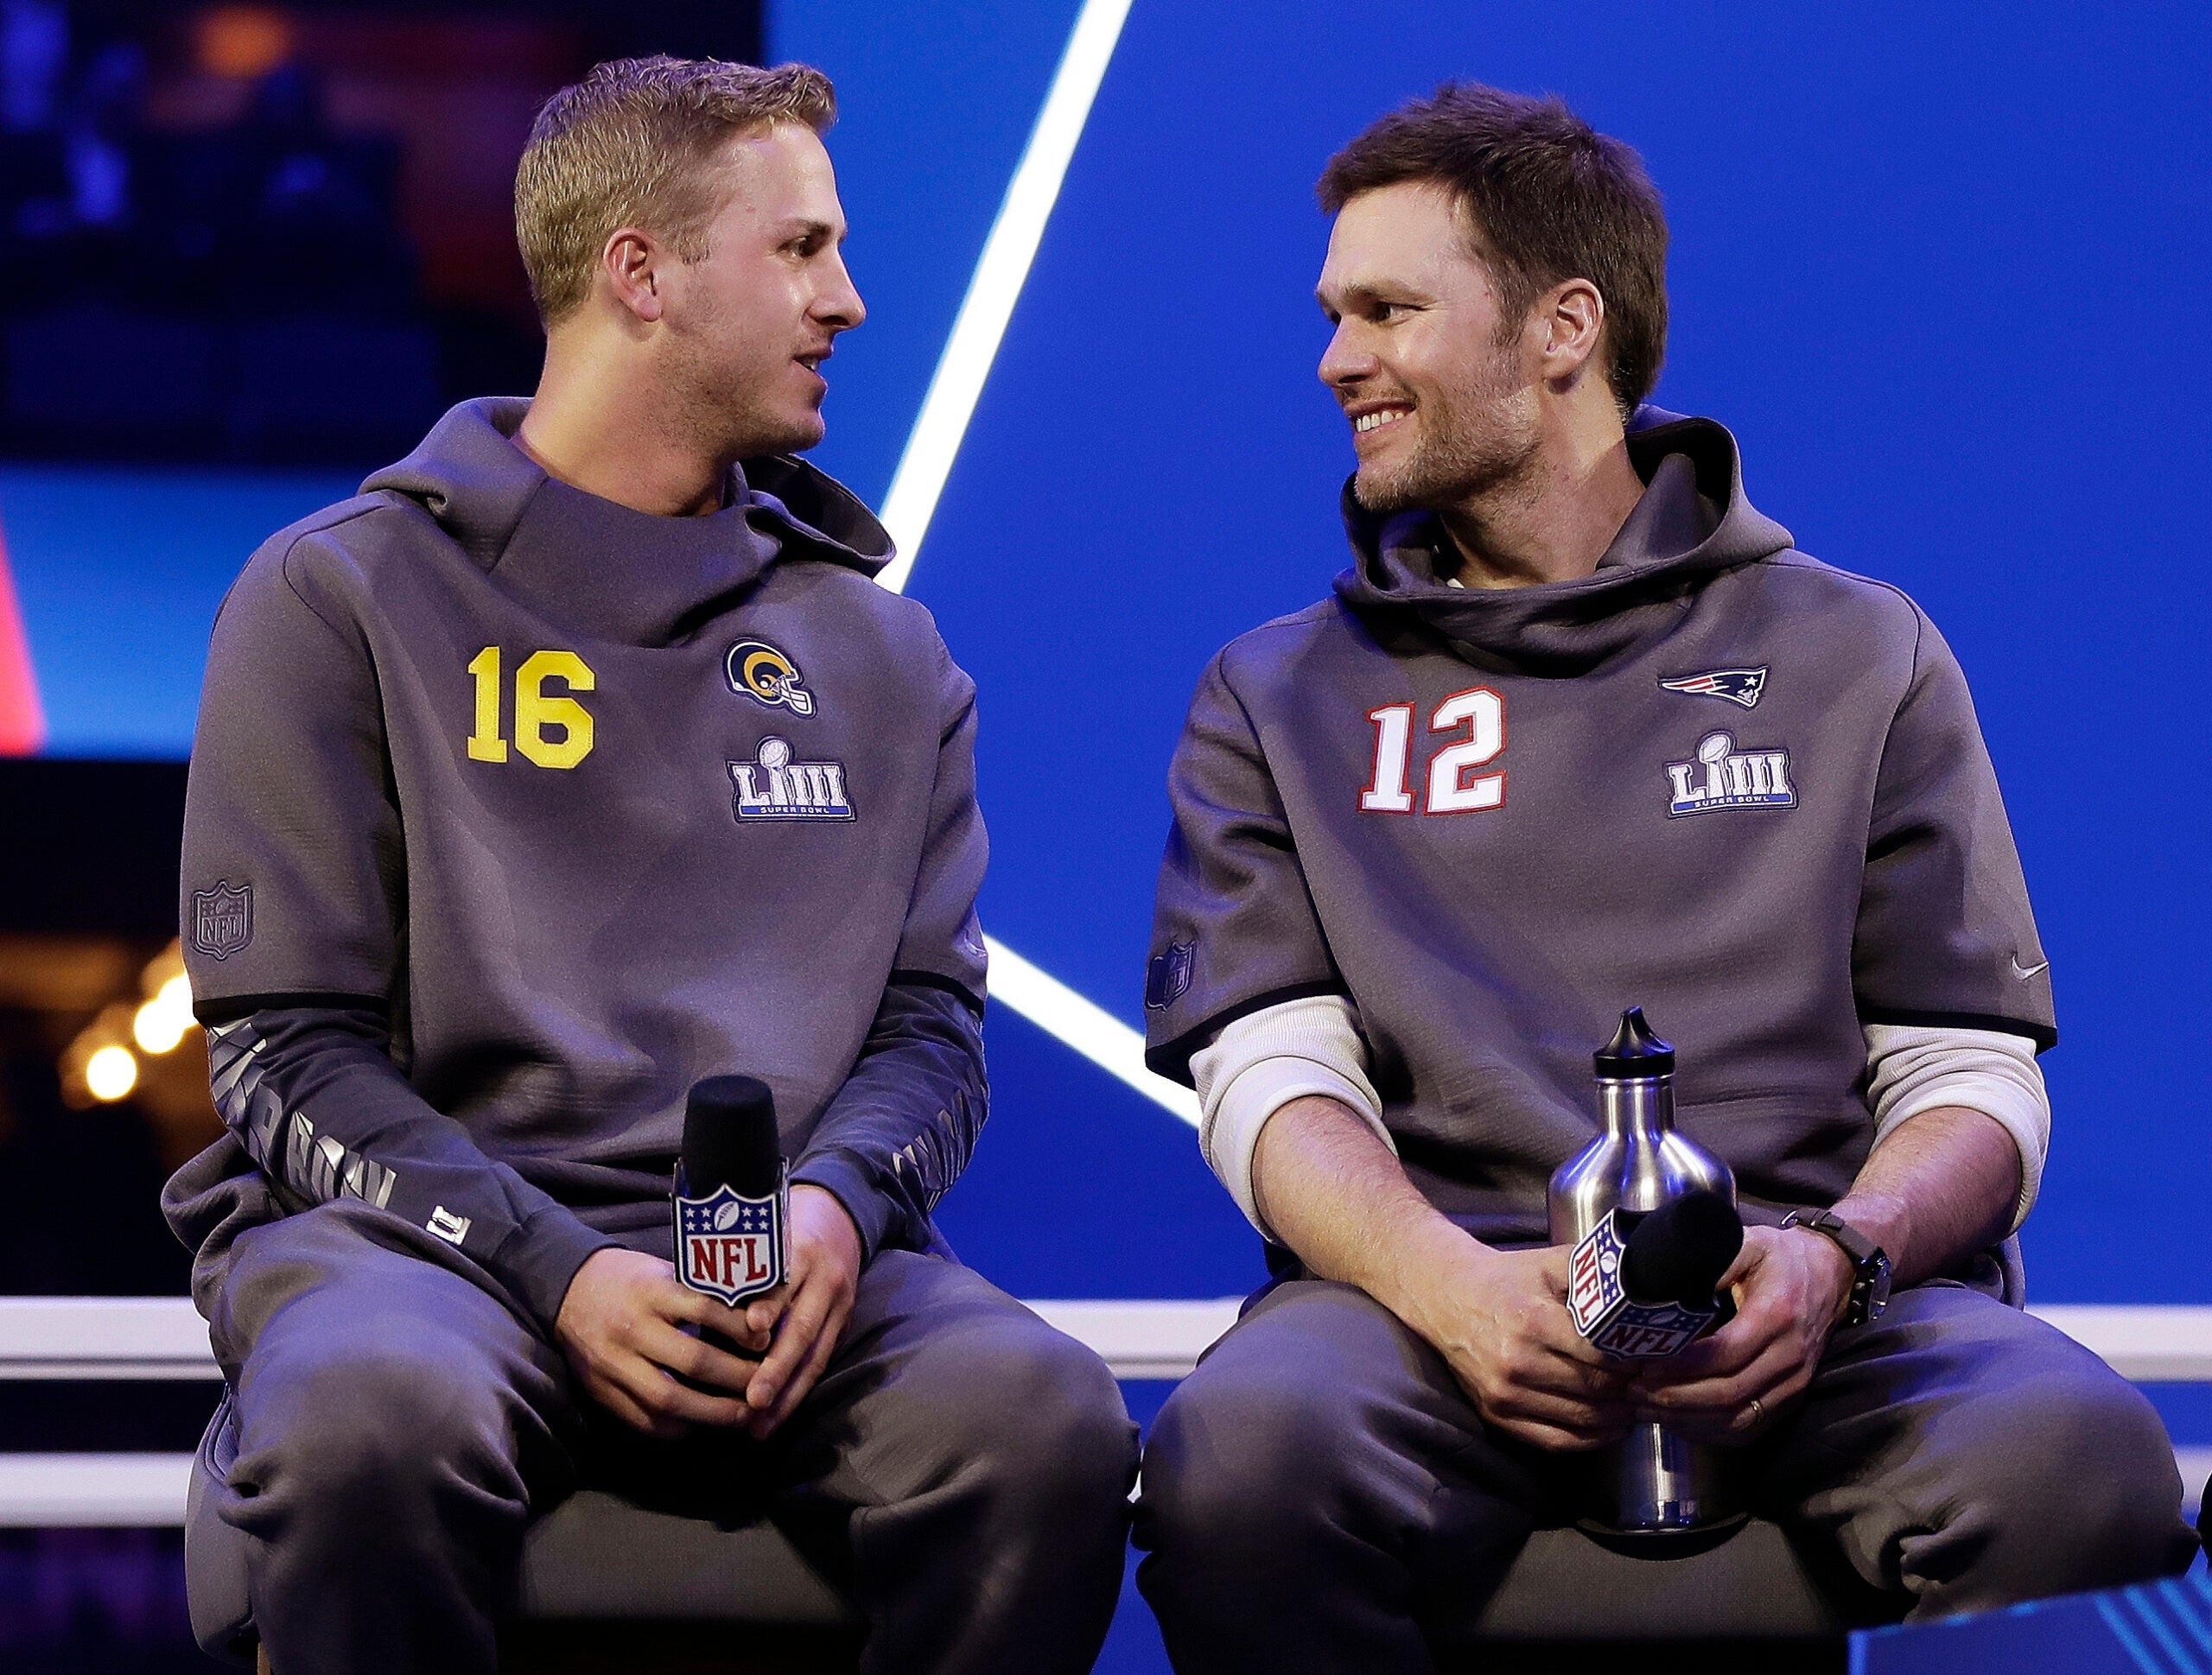 What Jared Goff had to say about facing Tom Brady in the Super Bowl